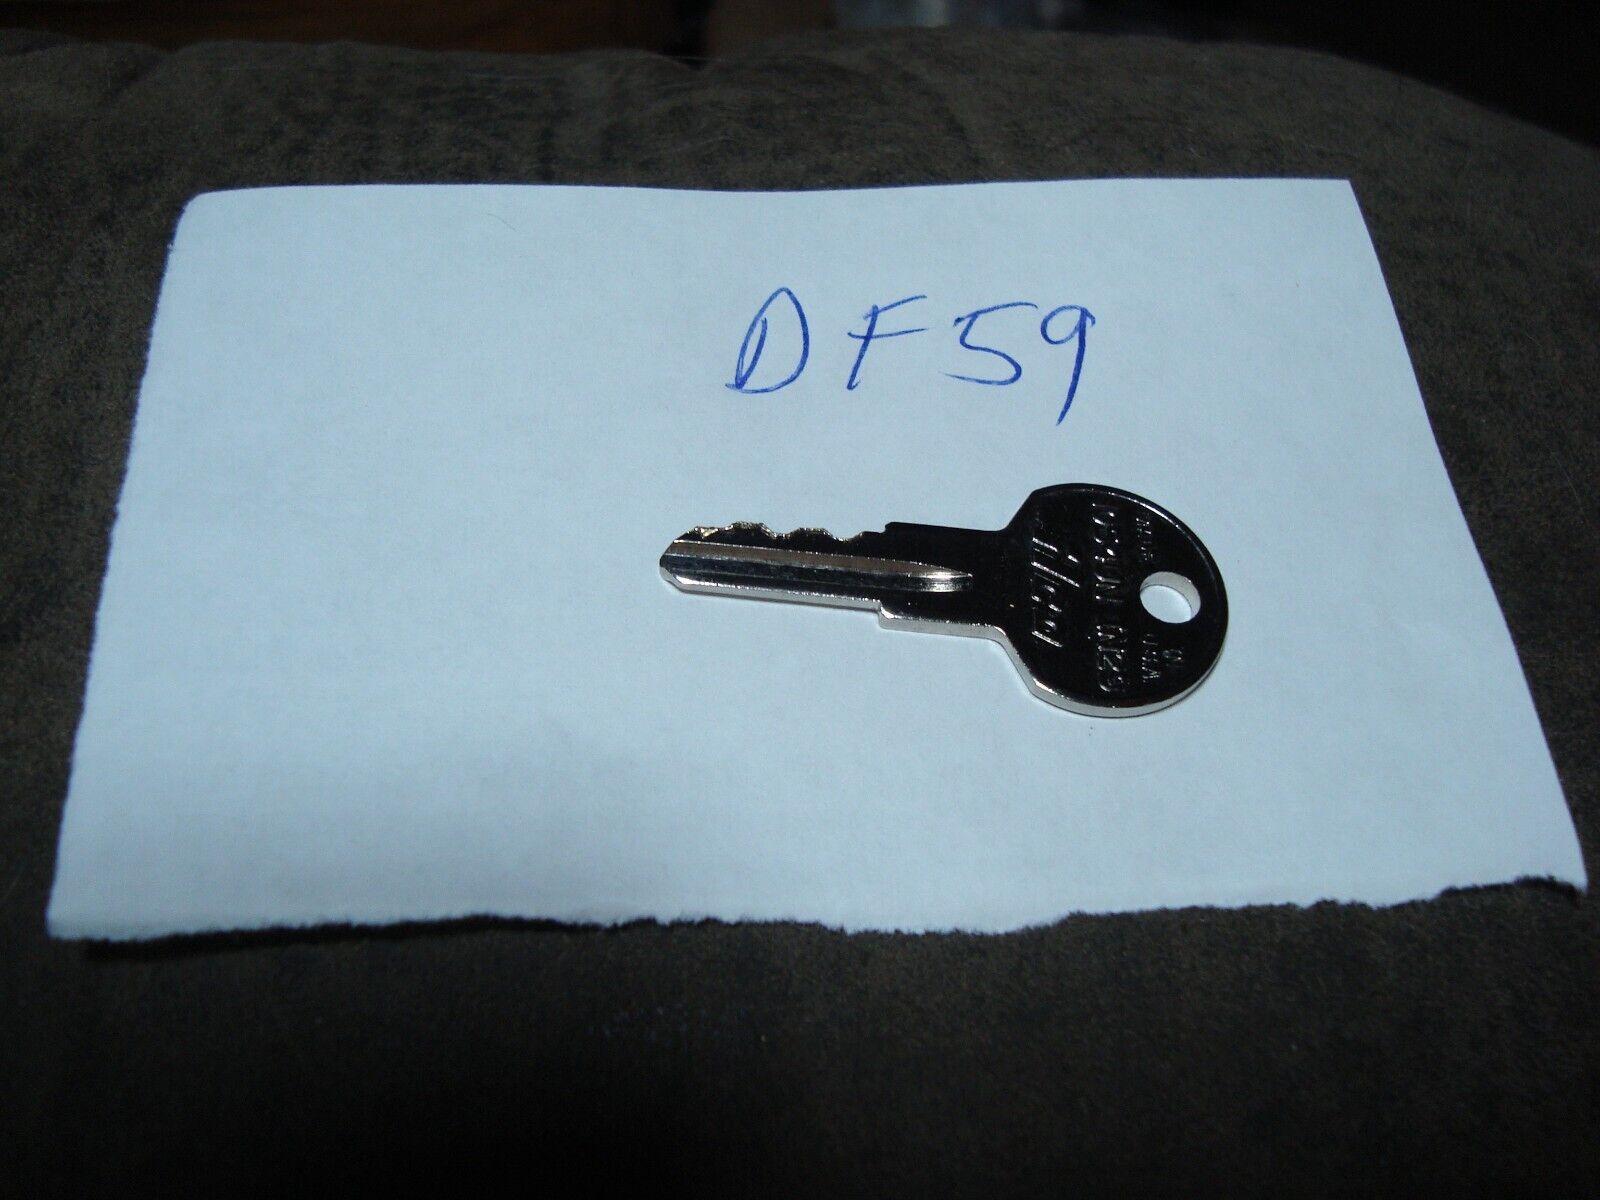 LOCKSMITH Unican Ilco DF59 key for Changing combination (1 KEY)See Description